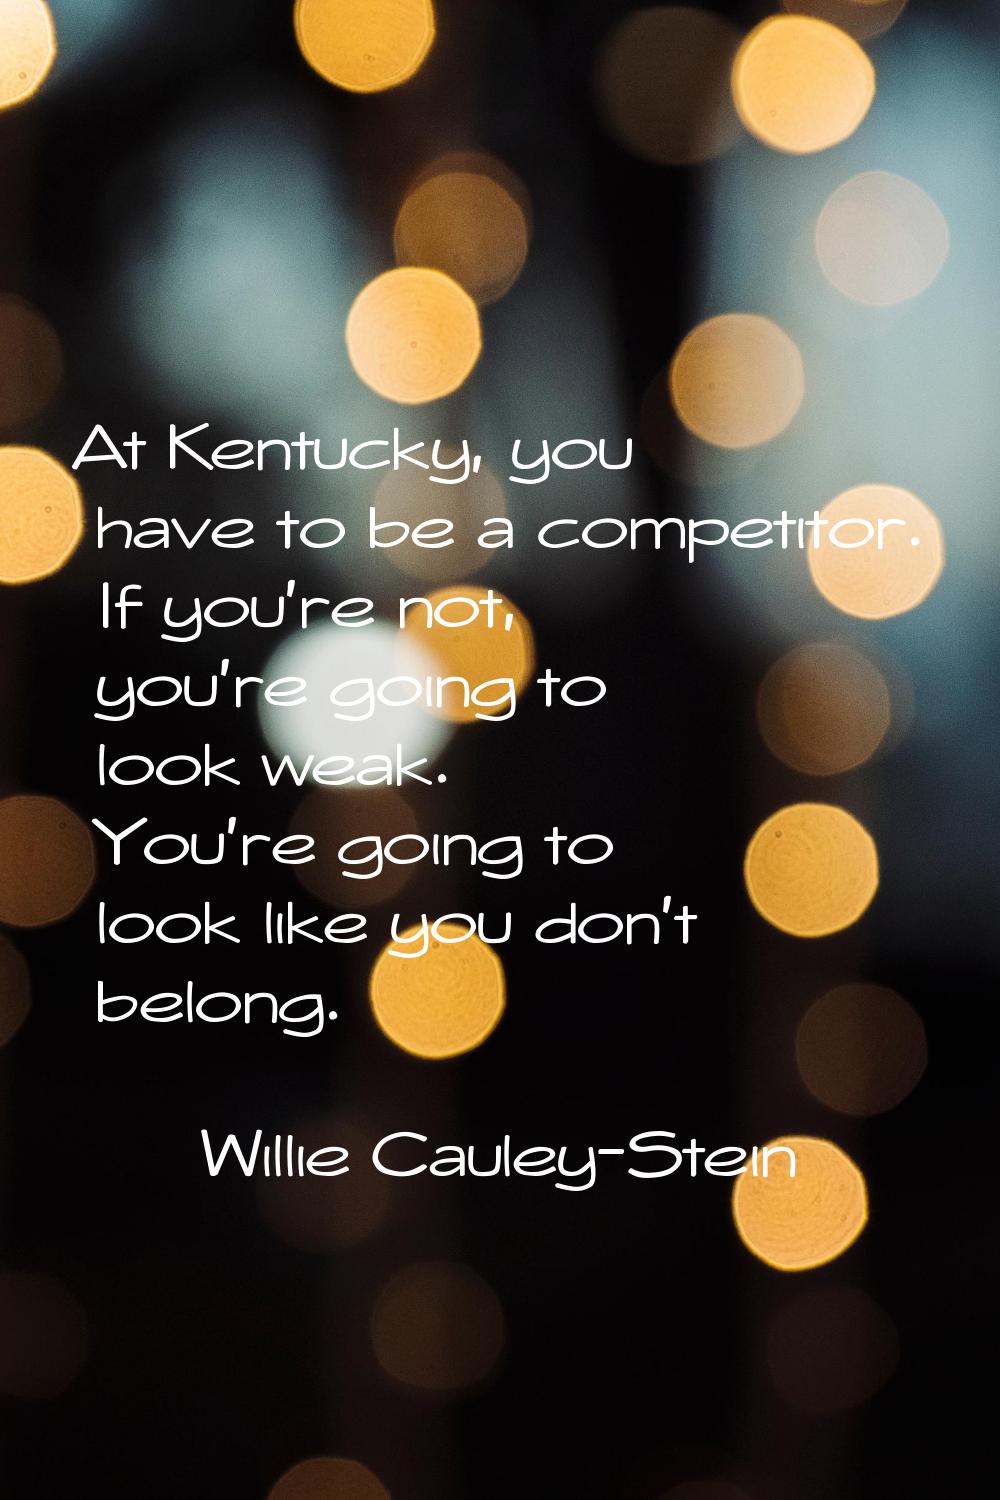 At Kentucky, you have to be a competitor. If you're not, you're going to look weak. You're going to